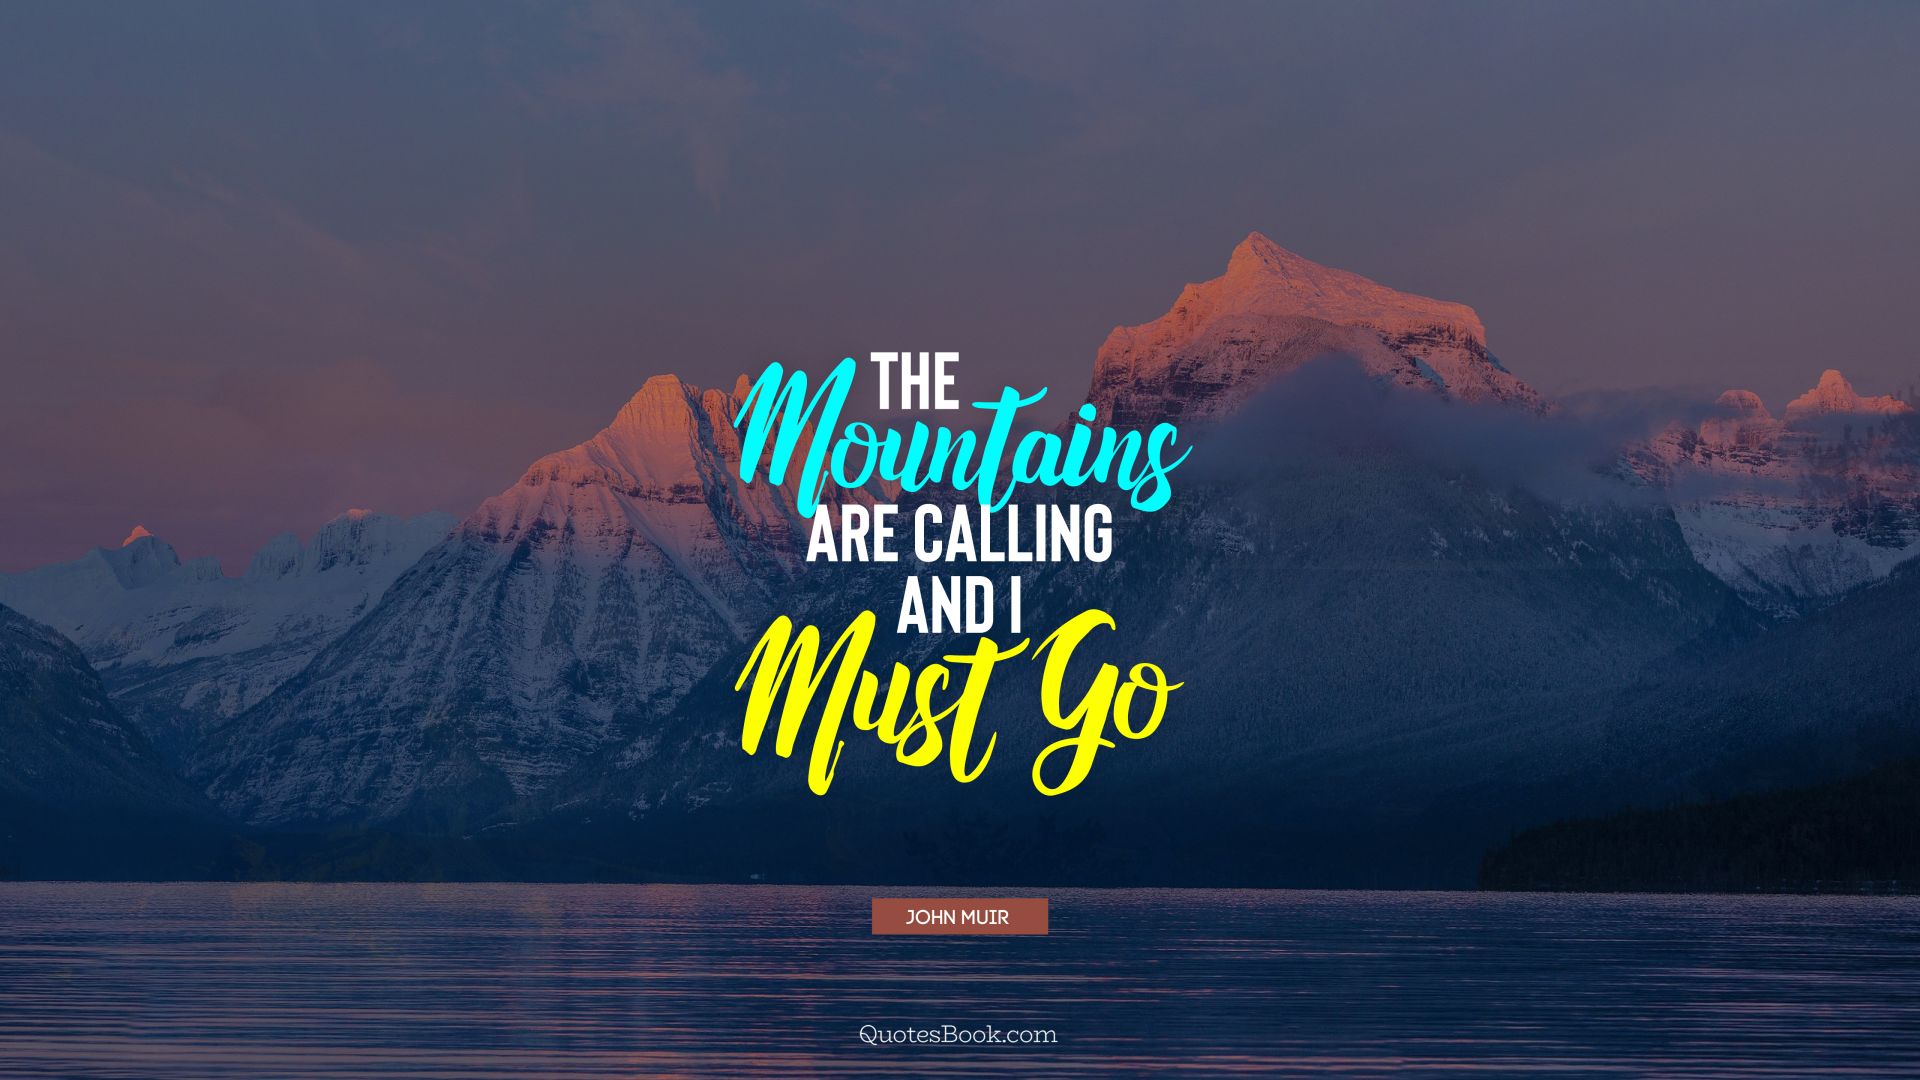 The mountains are calling and i must go. - Quote by John Muir